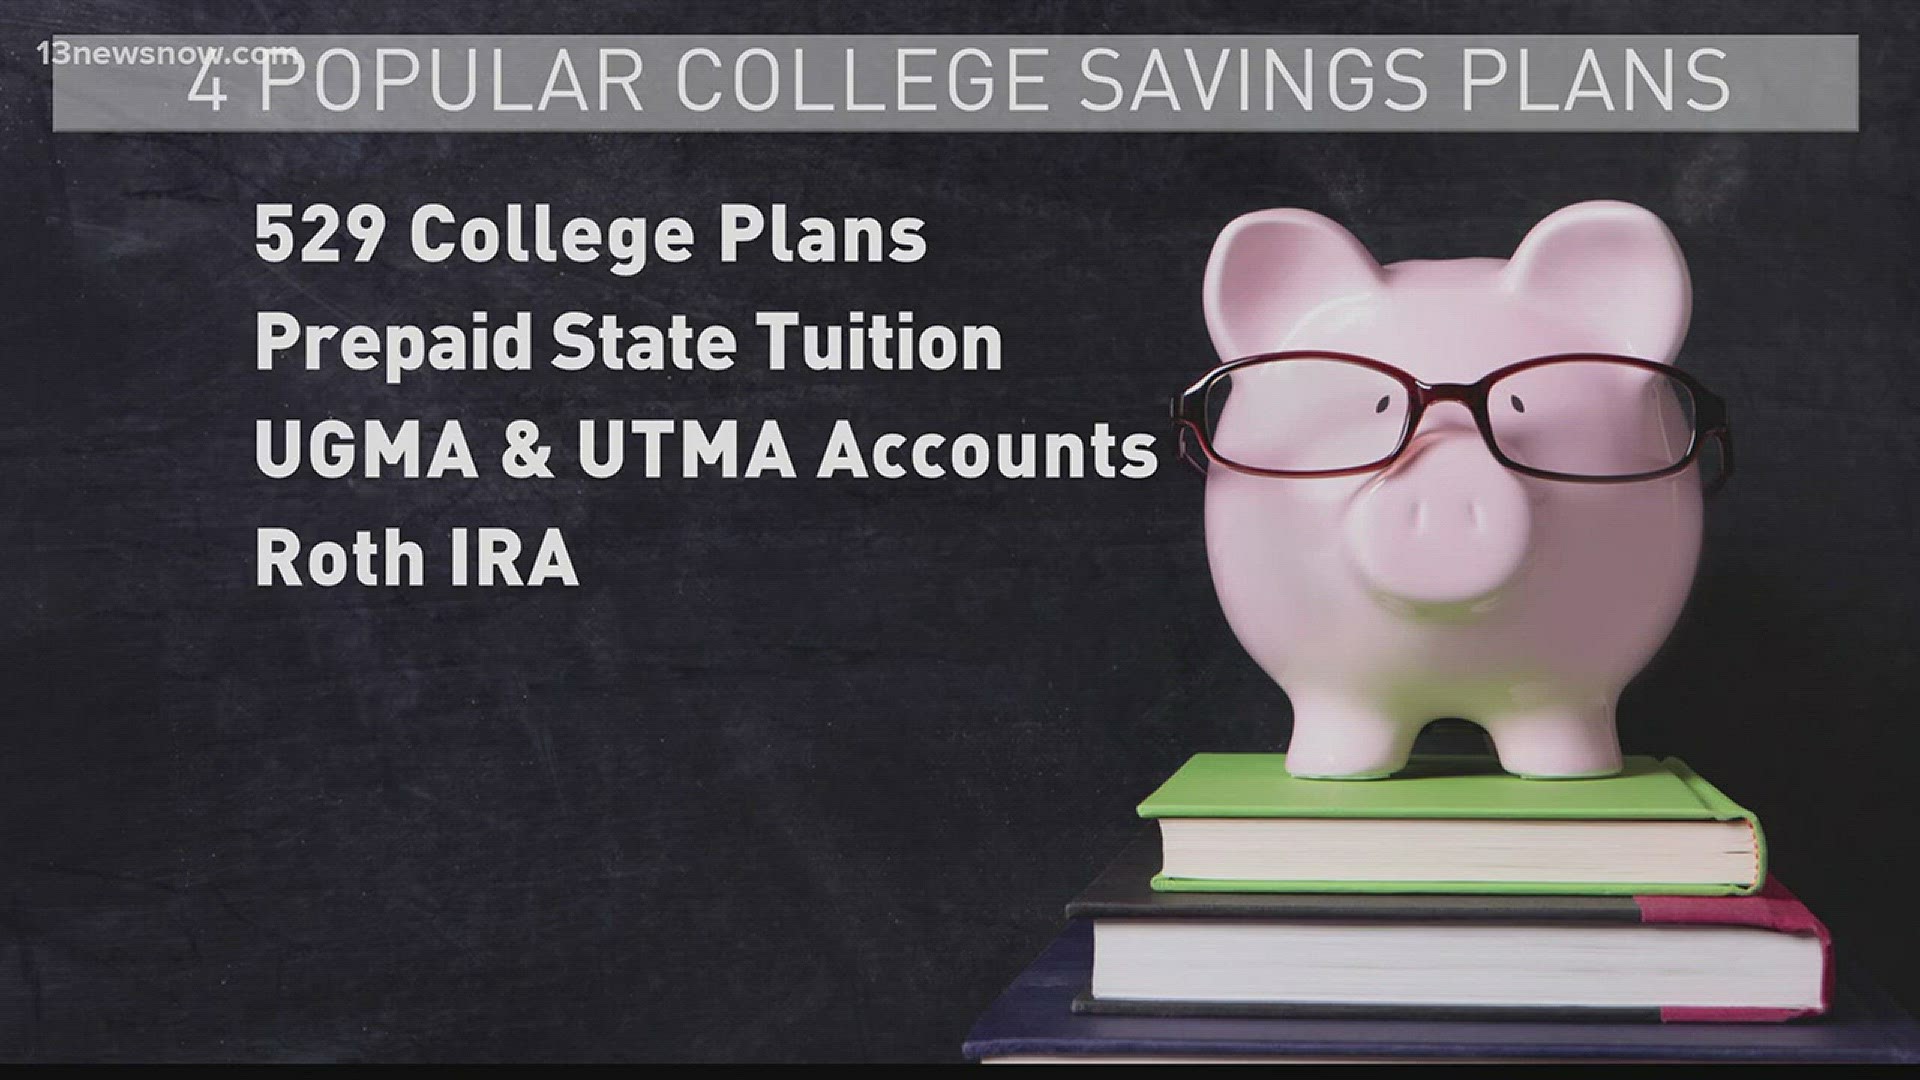 Lucy Bustamante has four popular ways to save for college.